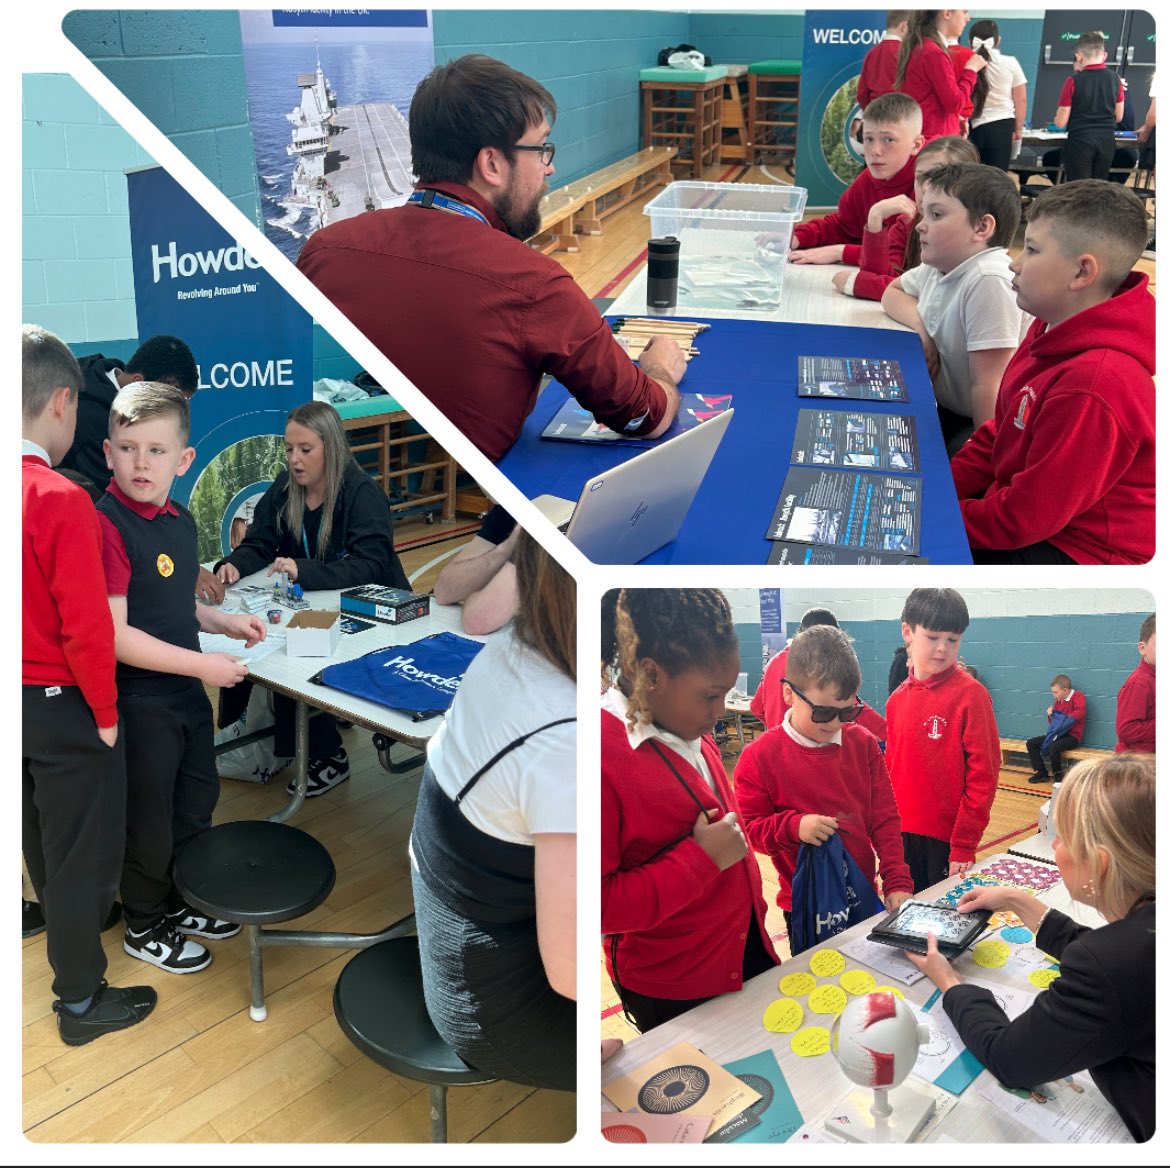 Primary 4-7 had a great time at our careers fair learning about different STEM careers. Thank you to all who came!  @WA_llp @babcockplc @NHSchildsmile @NHS  @GroupHowden